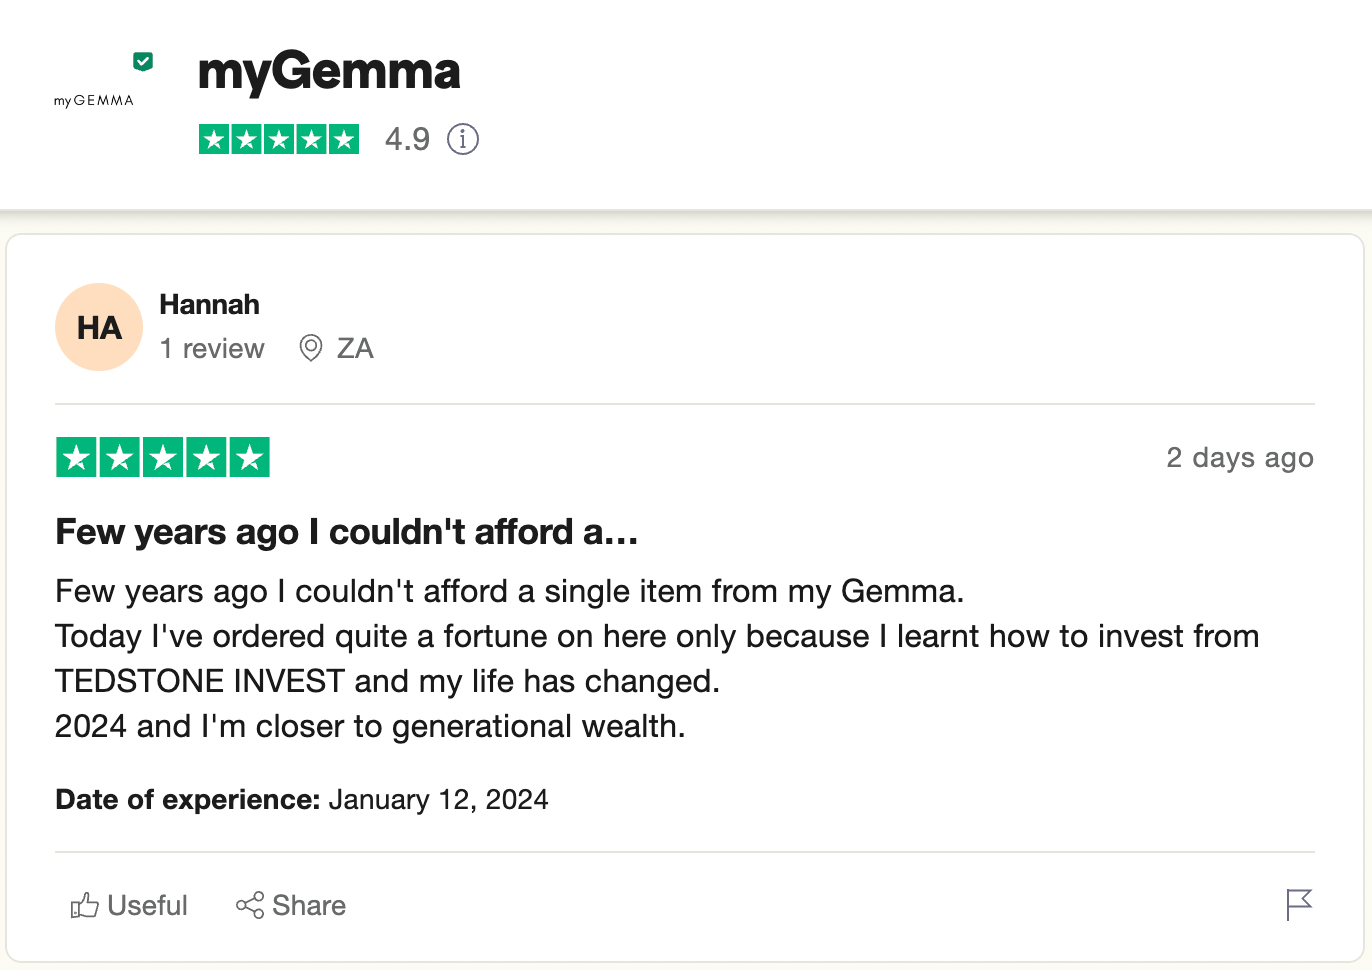 A review left on Trustpilot for jewelry brand myGemma.